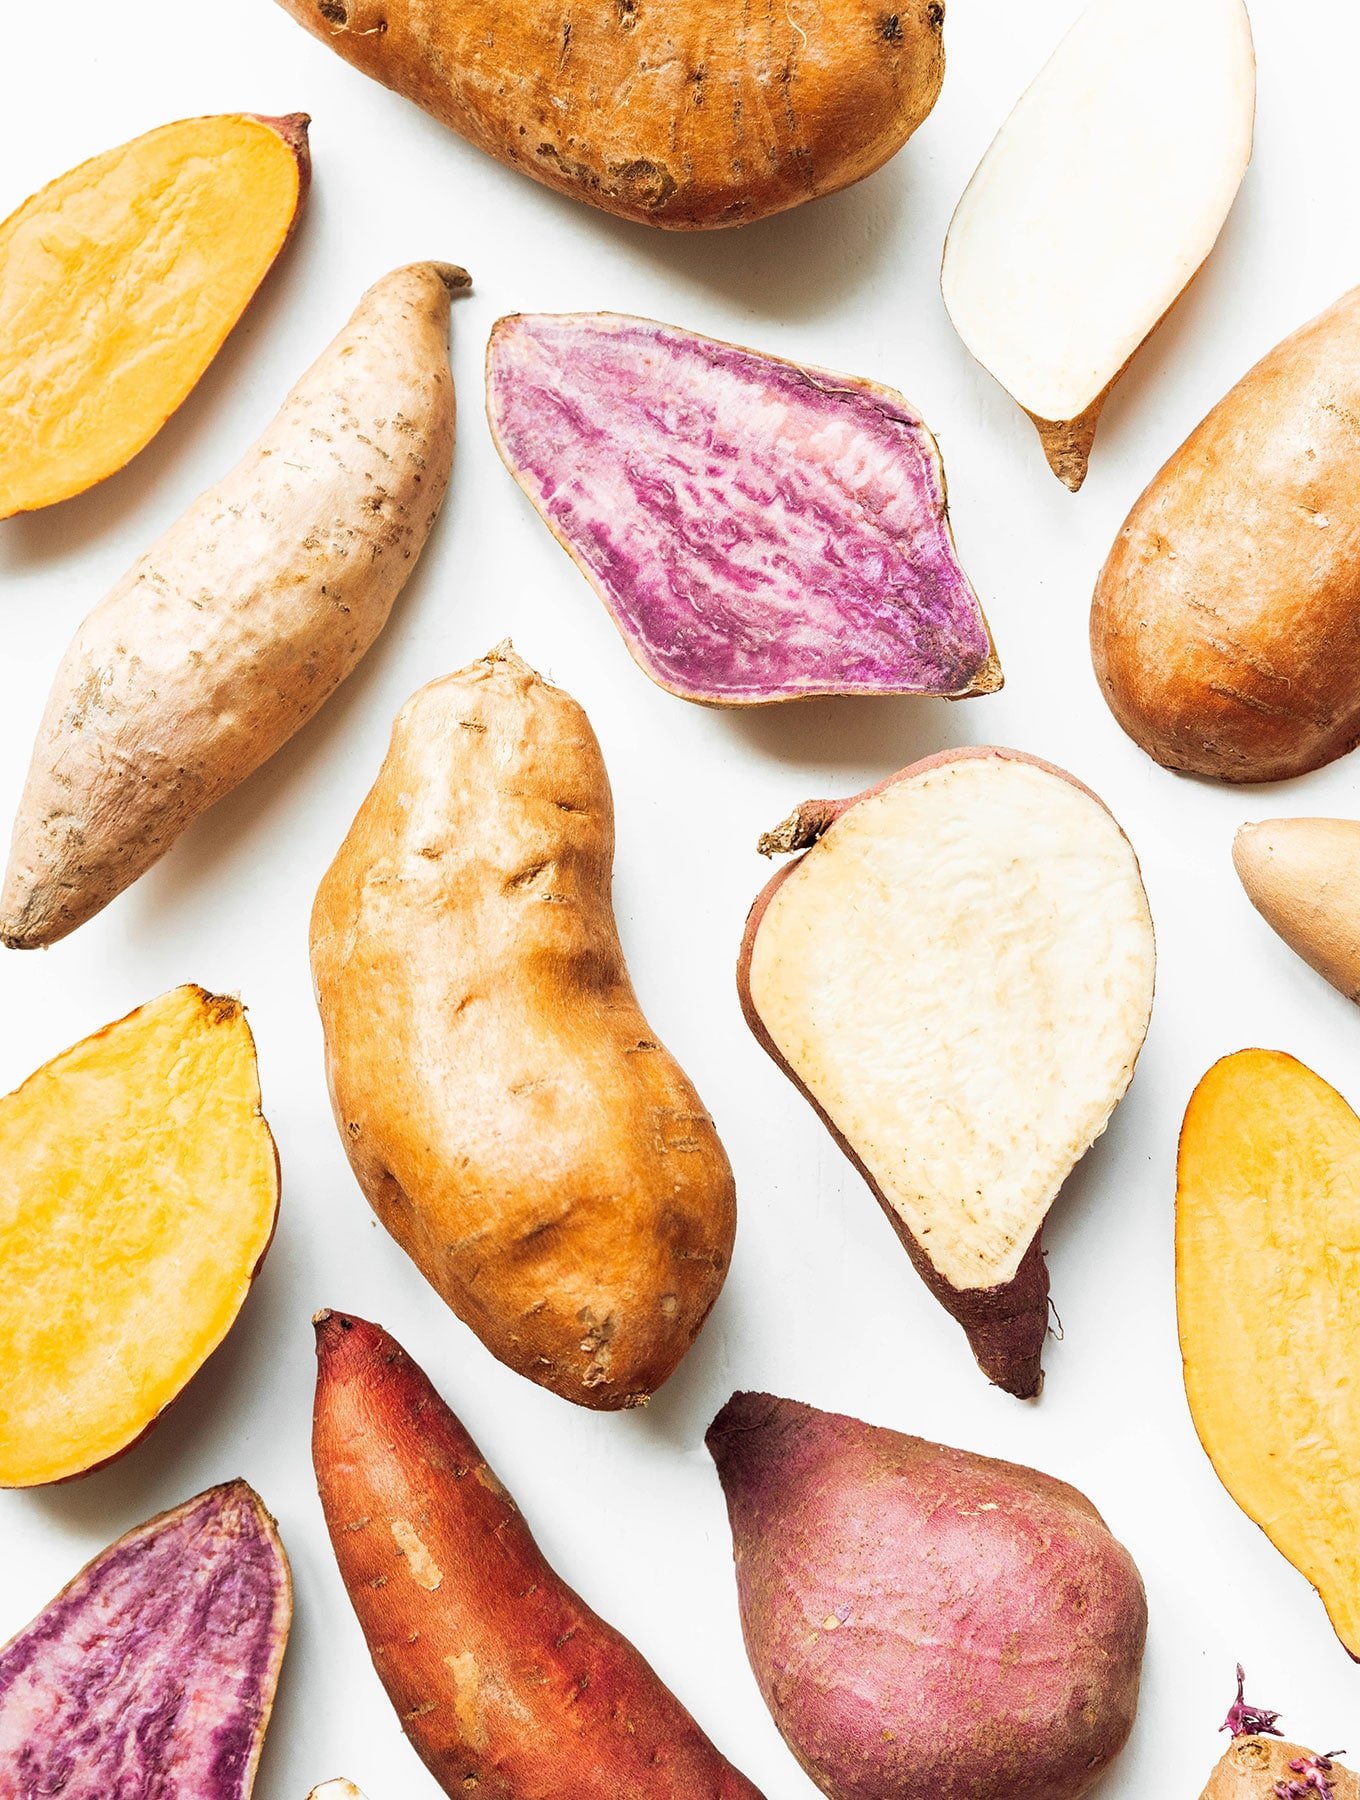 Sweet Potatoes 101: Types Of Sweet Potatoes To Know About